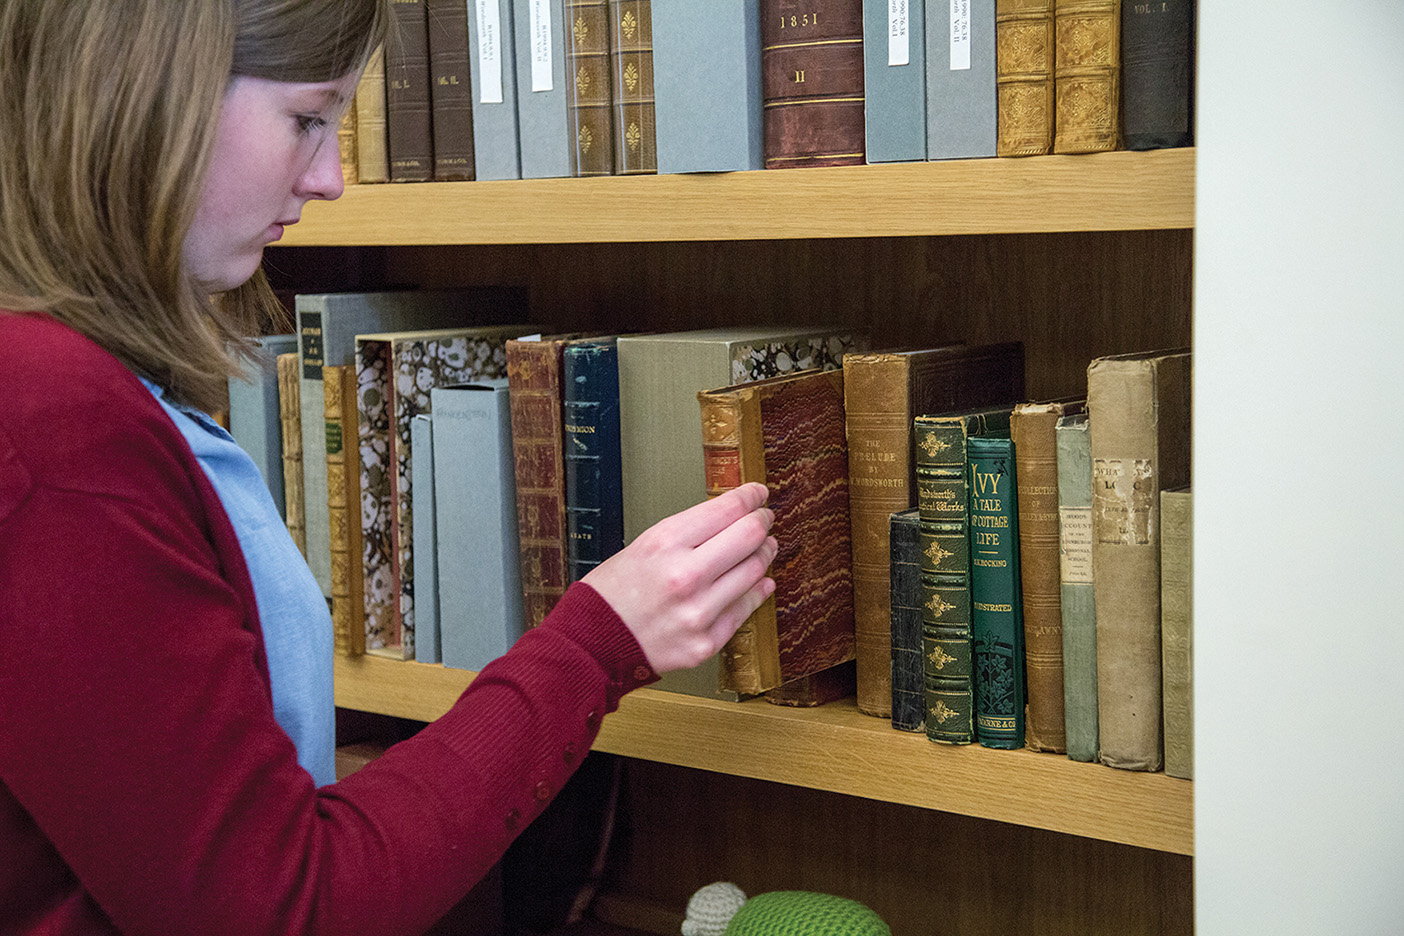 Alison L. Siggard examines a volume from the Wordsworth Trust archive, which owns nearly all of the poet's original manuscripts and has an extensive collection of rare books and art from the Romantic period.